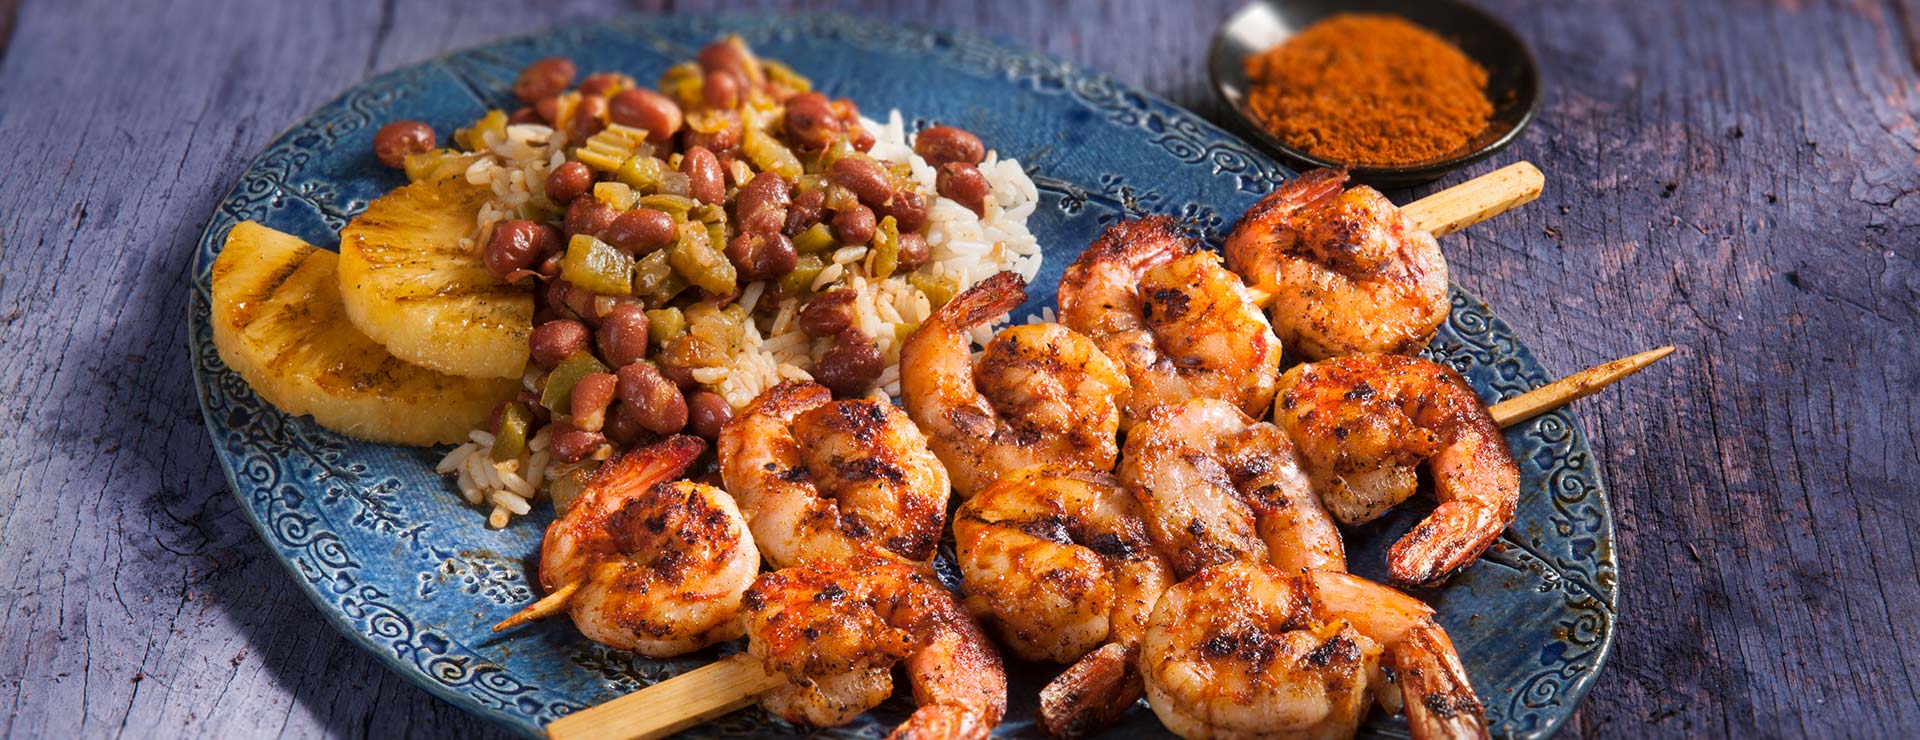 Spicy Shrimp Skewers Served with Red Beans and Rice